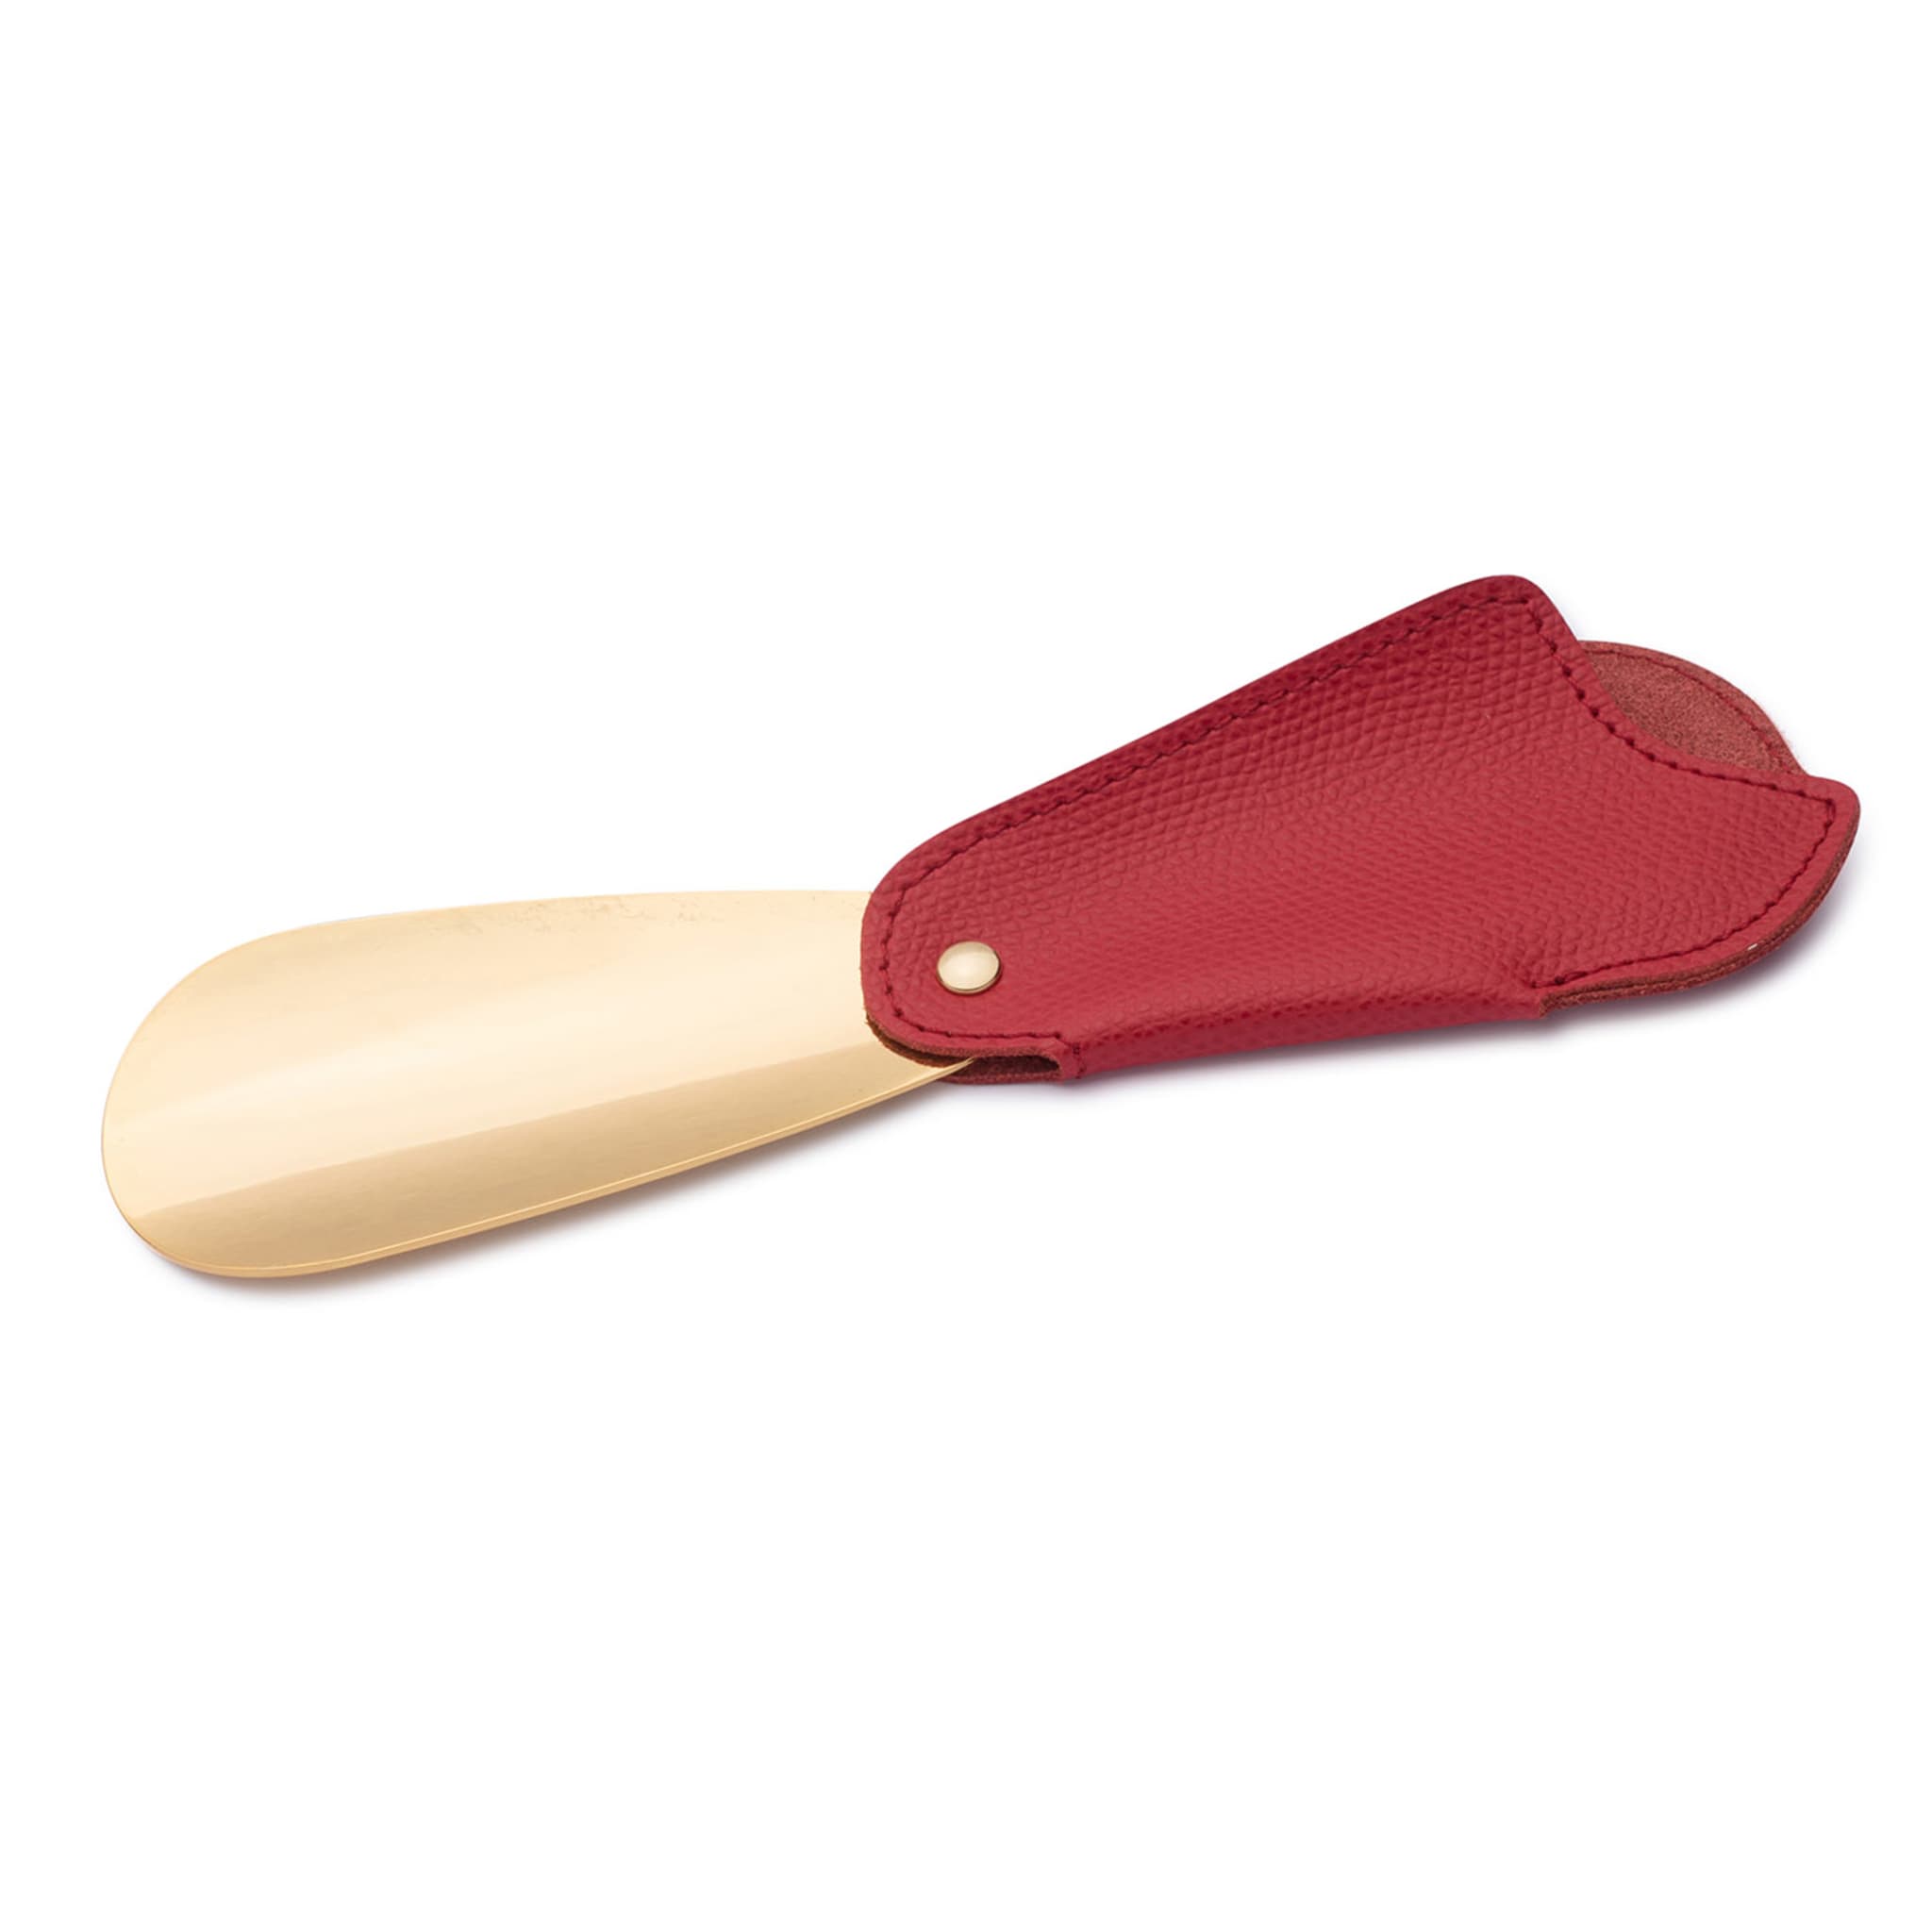 Red & Gold Hammered Leather Travel Shoe Horn - Alternative view 2